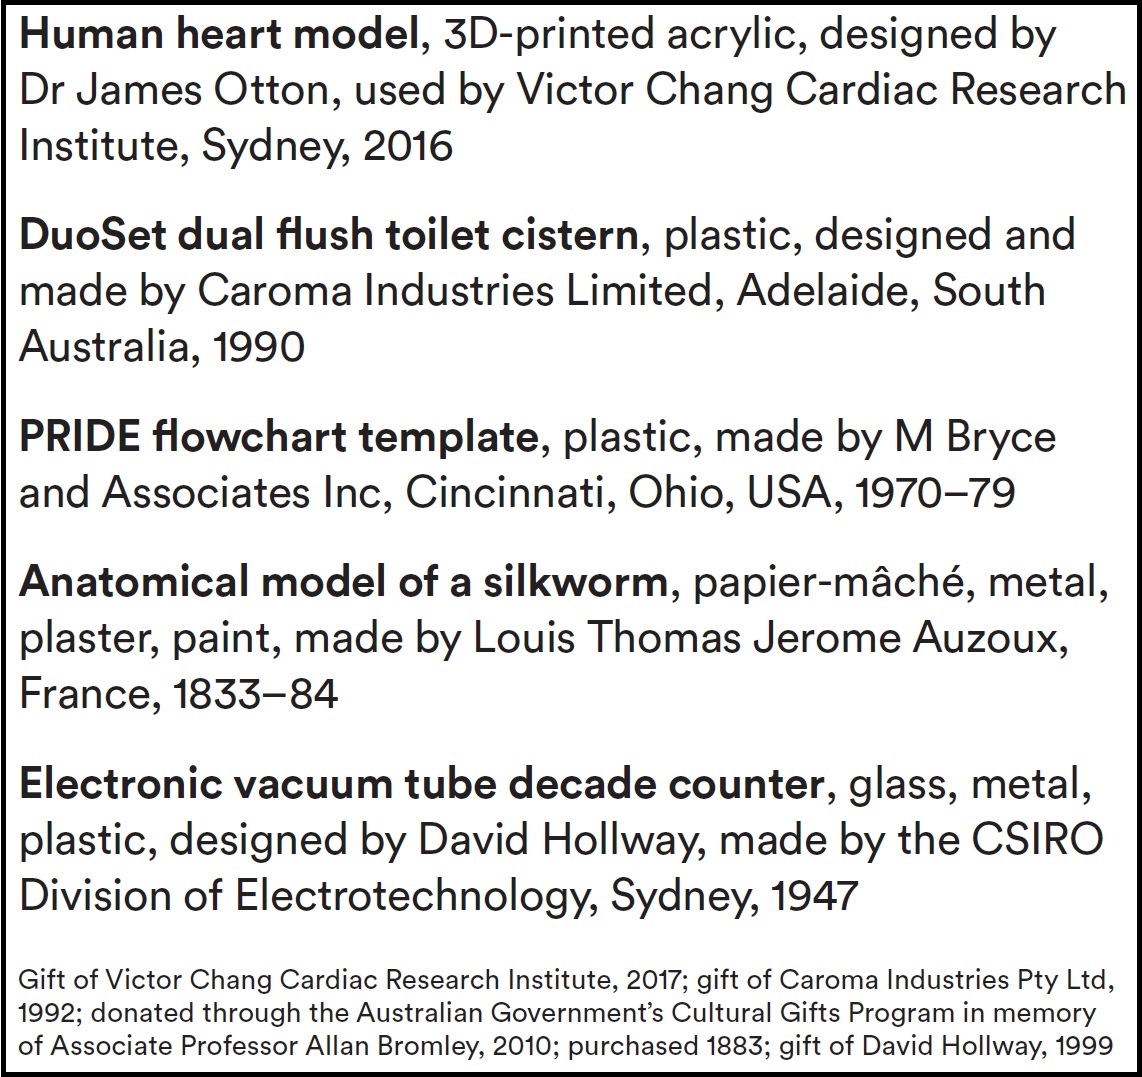 A screenshot of a sample of the object label listing report produced from the EMu collection database including the 3D printed human heart model, DuoSet dual flush toilet, PRIDE flowcharting template, anatomical model of a silkworm and electronic vacuum tube decade counter